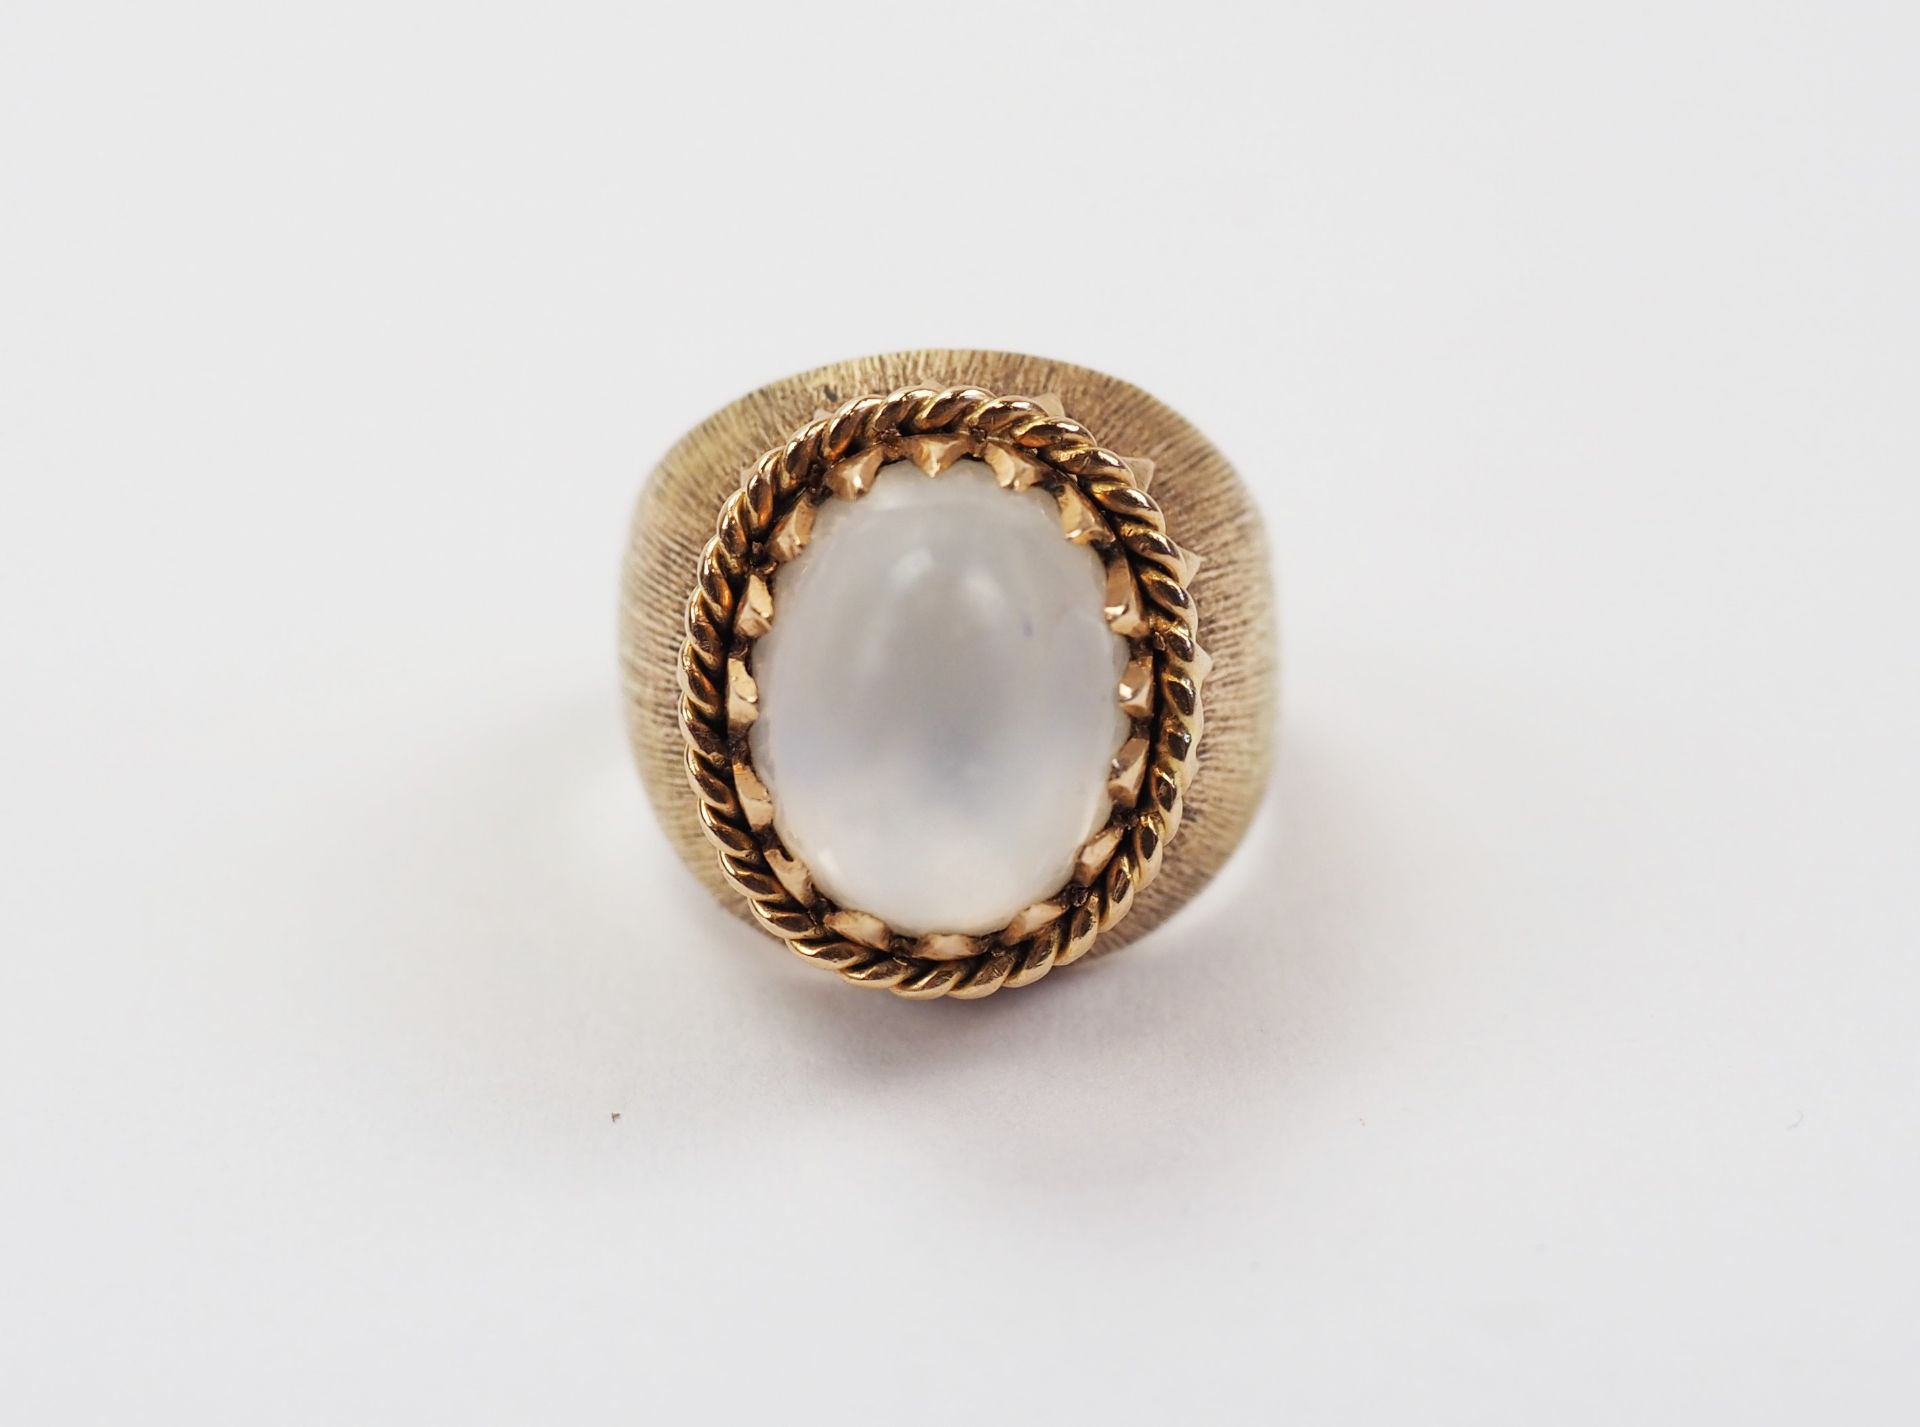 Ring GOLD. - Image 2 of 3